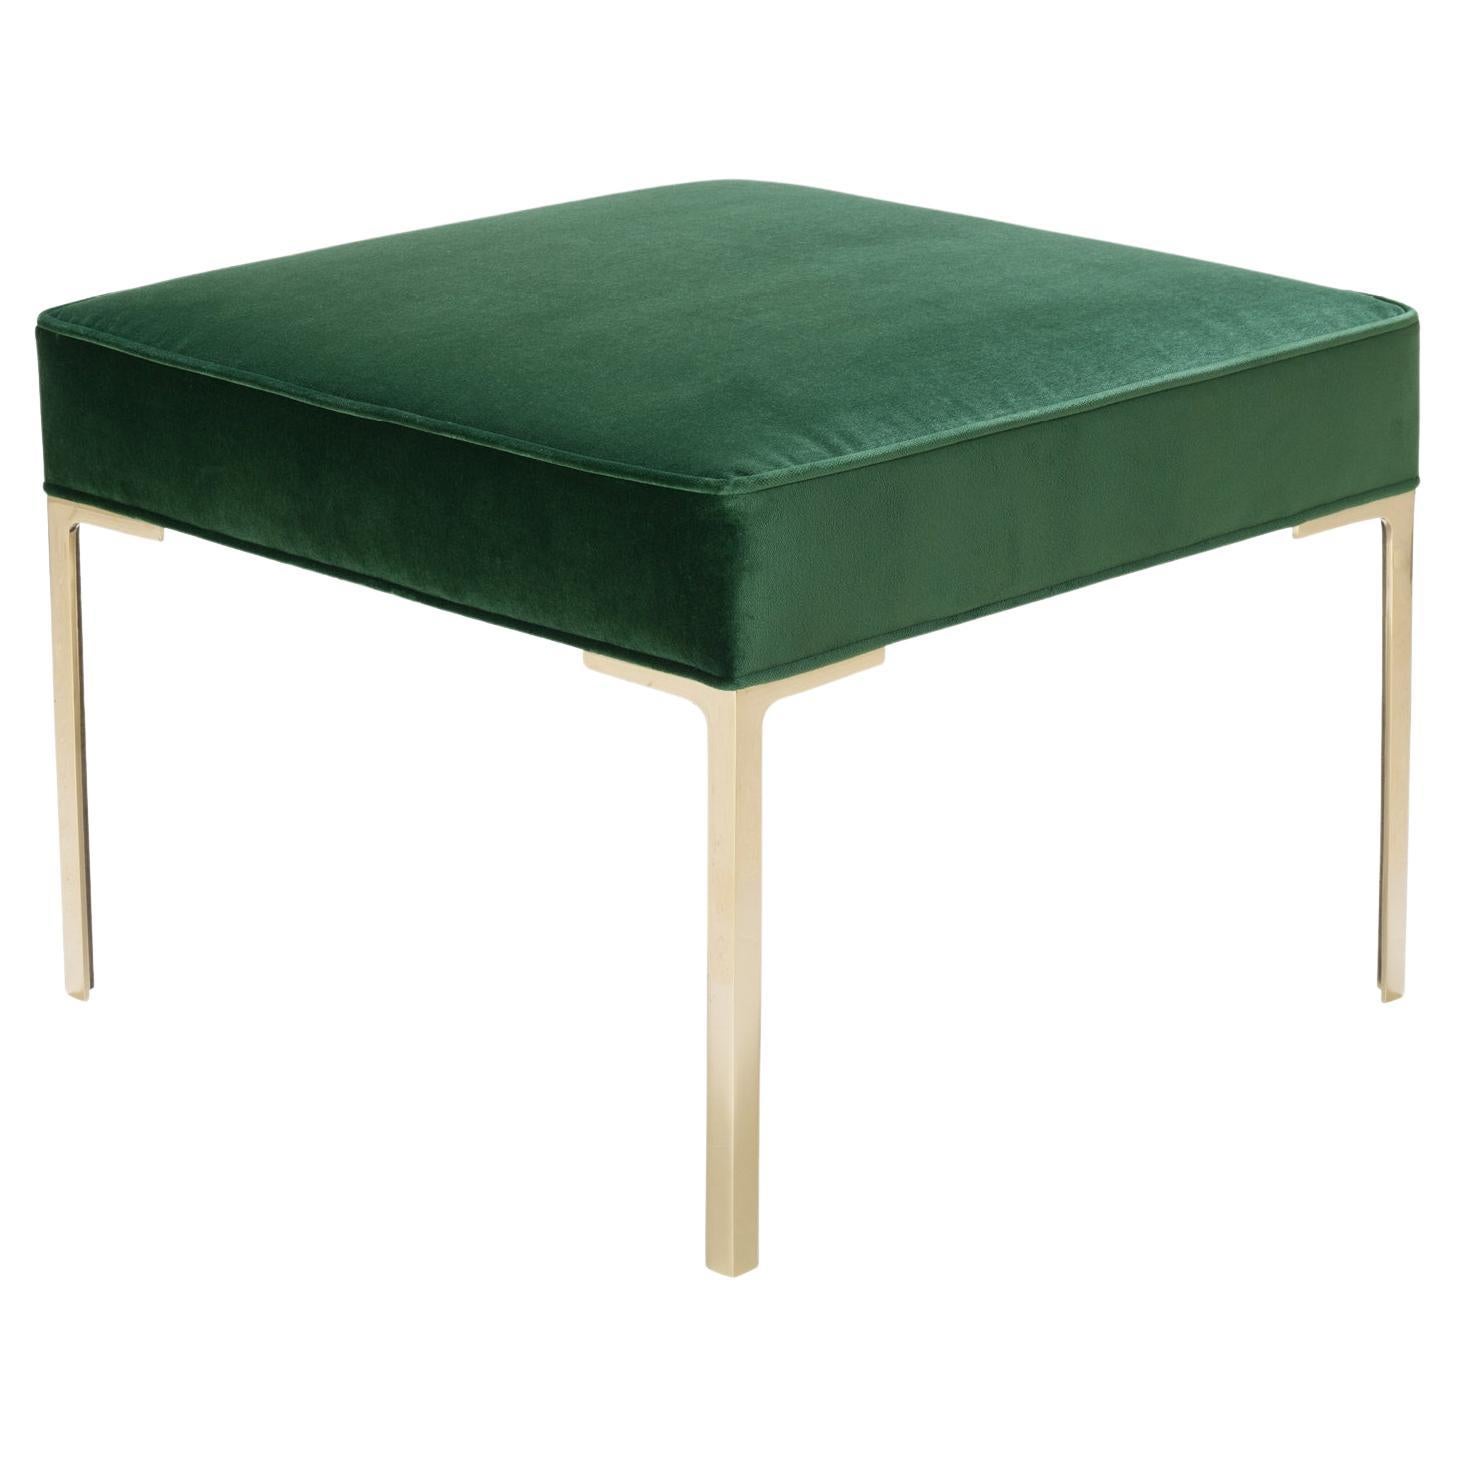 Astor Square Brass Ottoman in Emerald Velvet by Montage